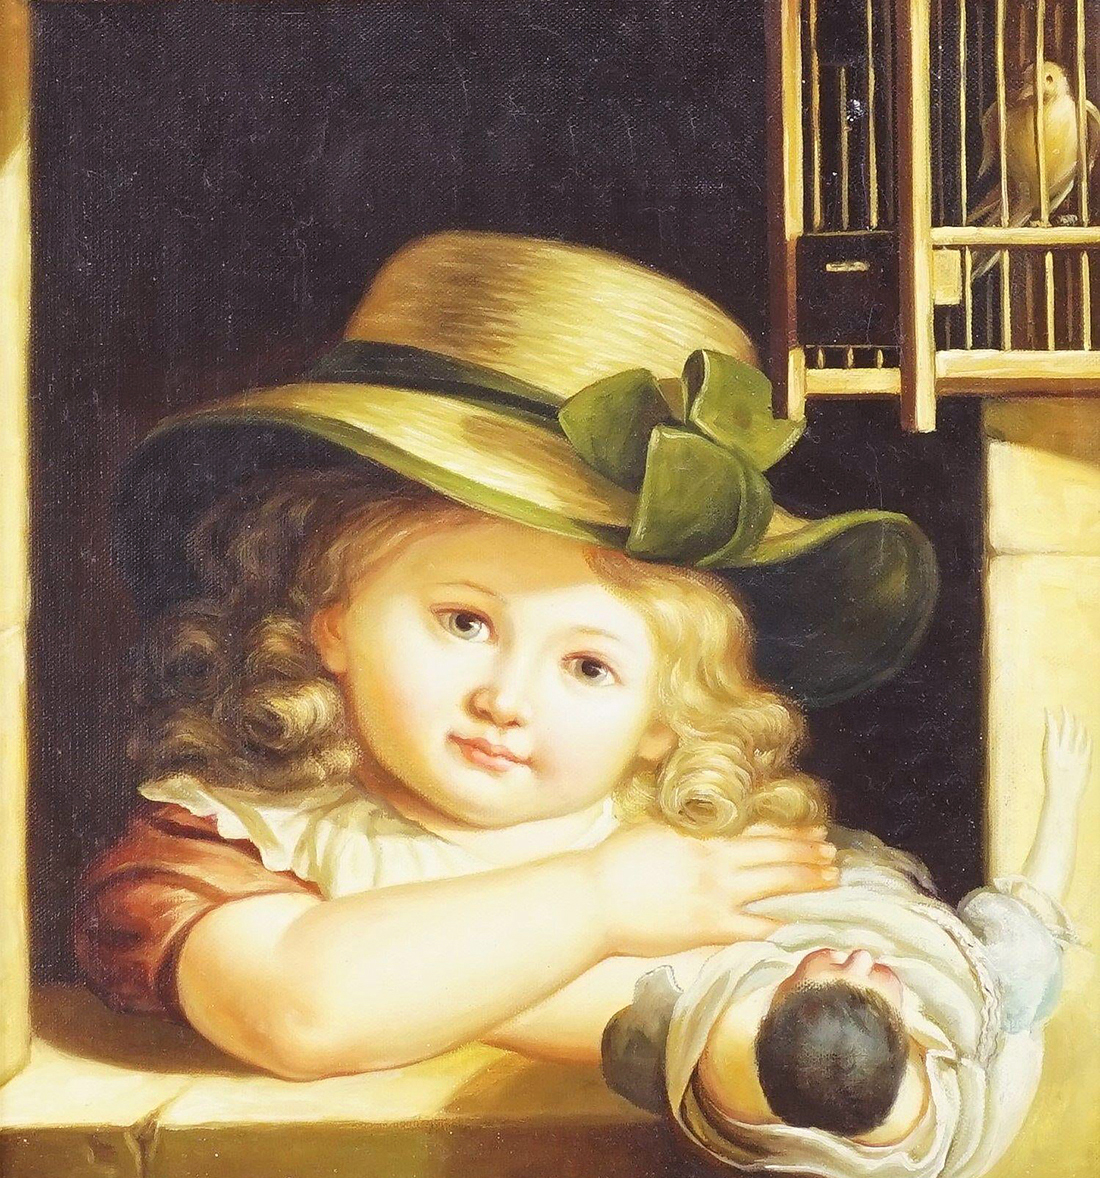 Child with doll